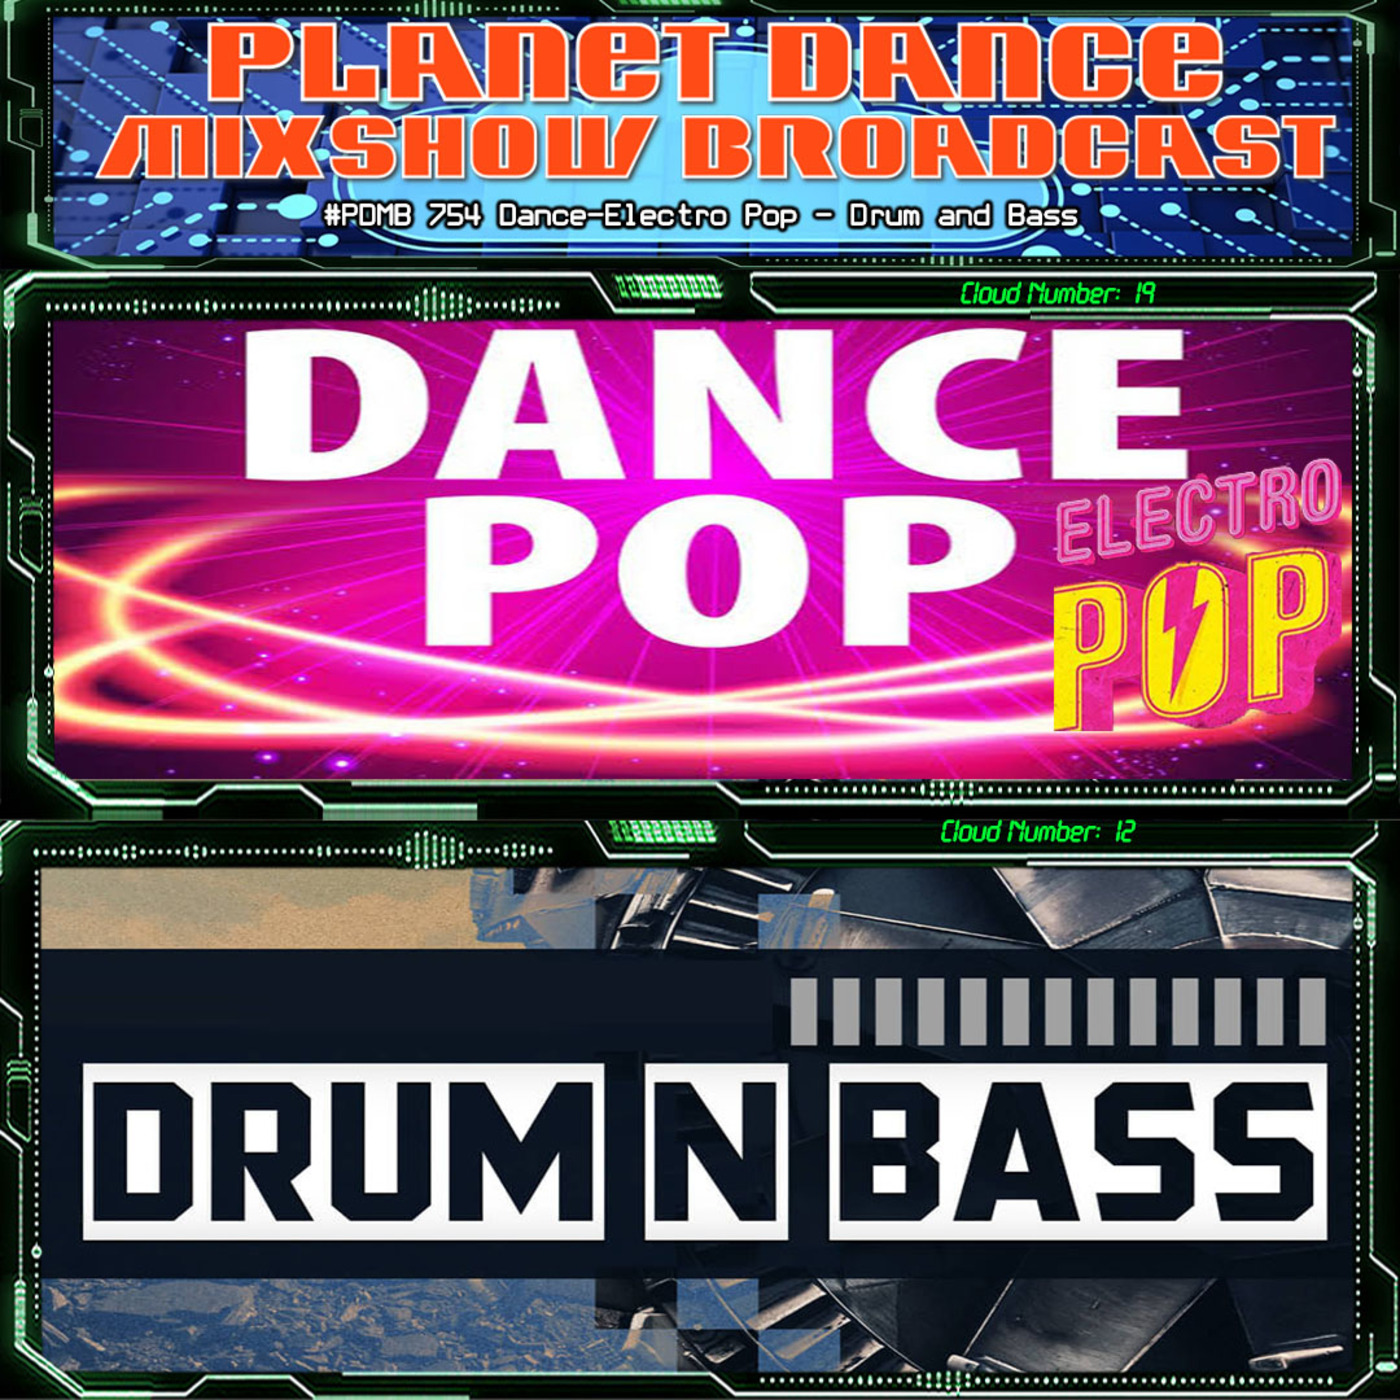 Planet Dance Mixshow Broadcast 754 Dance-Electro Pop - Drum and Bass